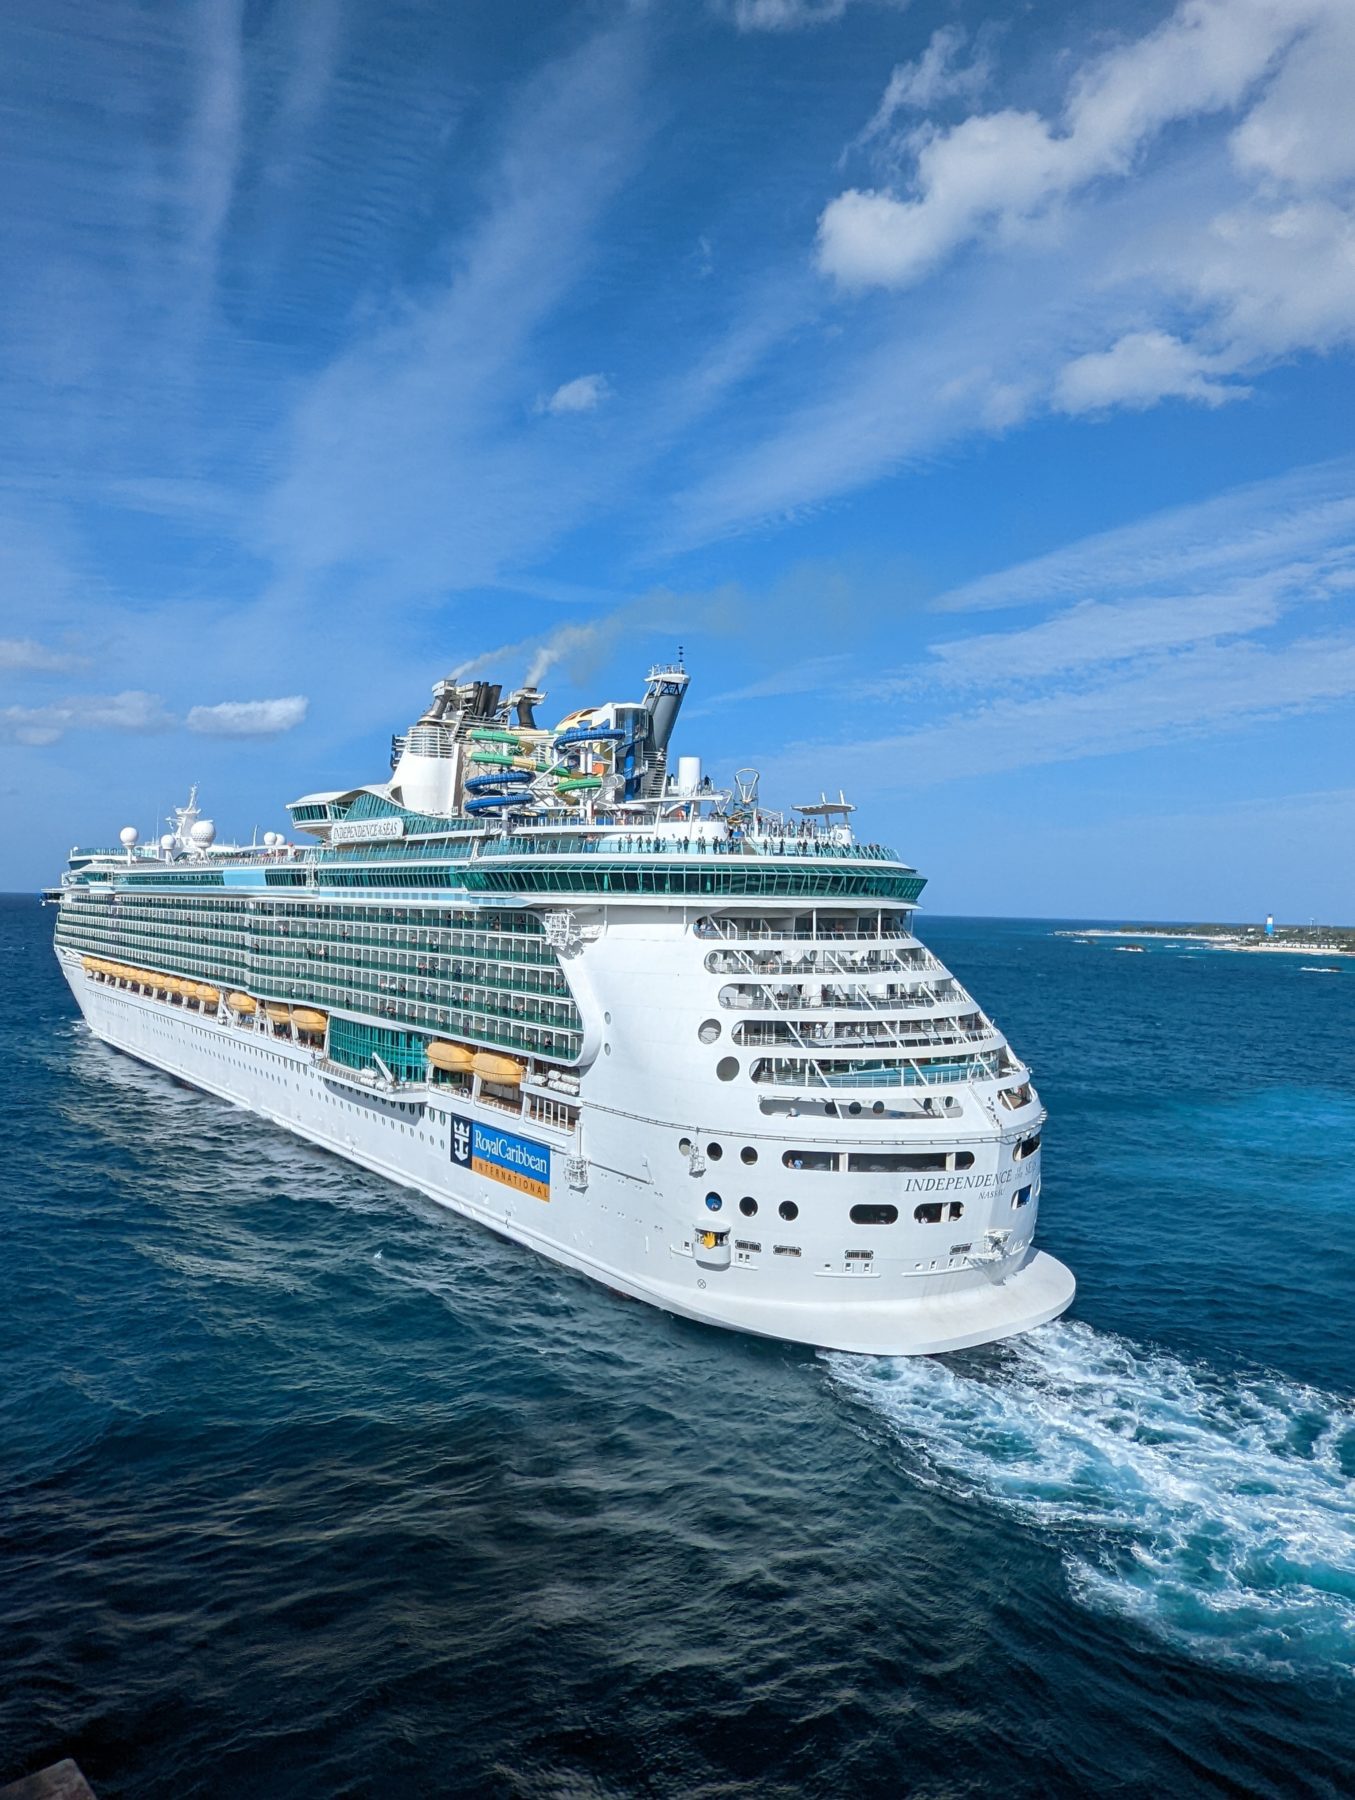 Texas family attractions - Cruise